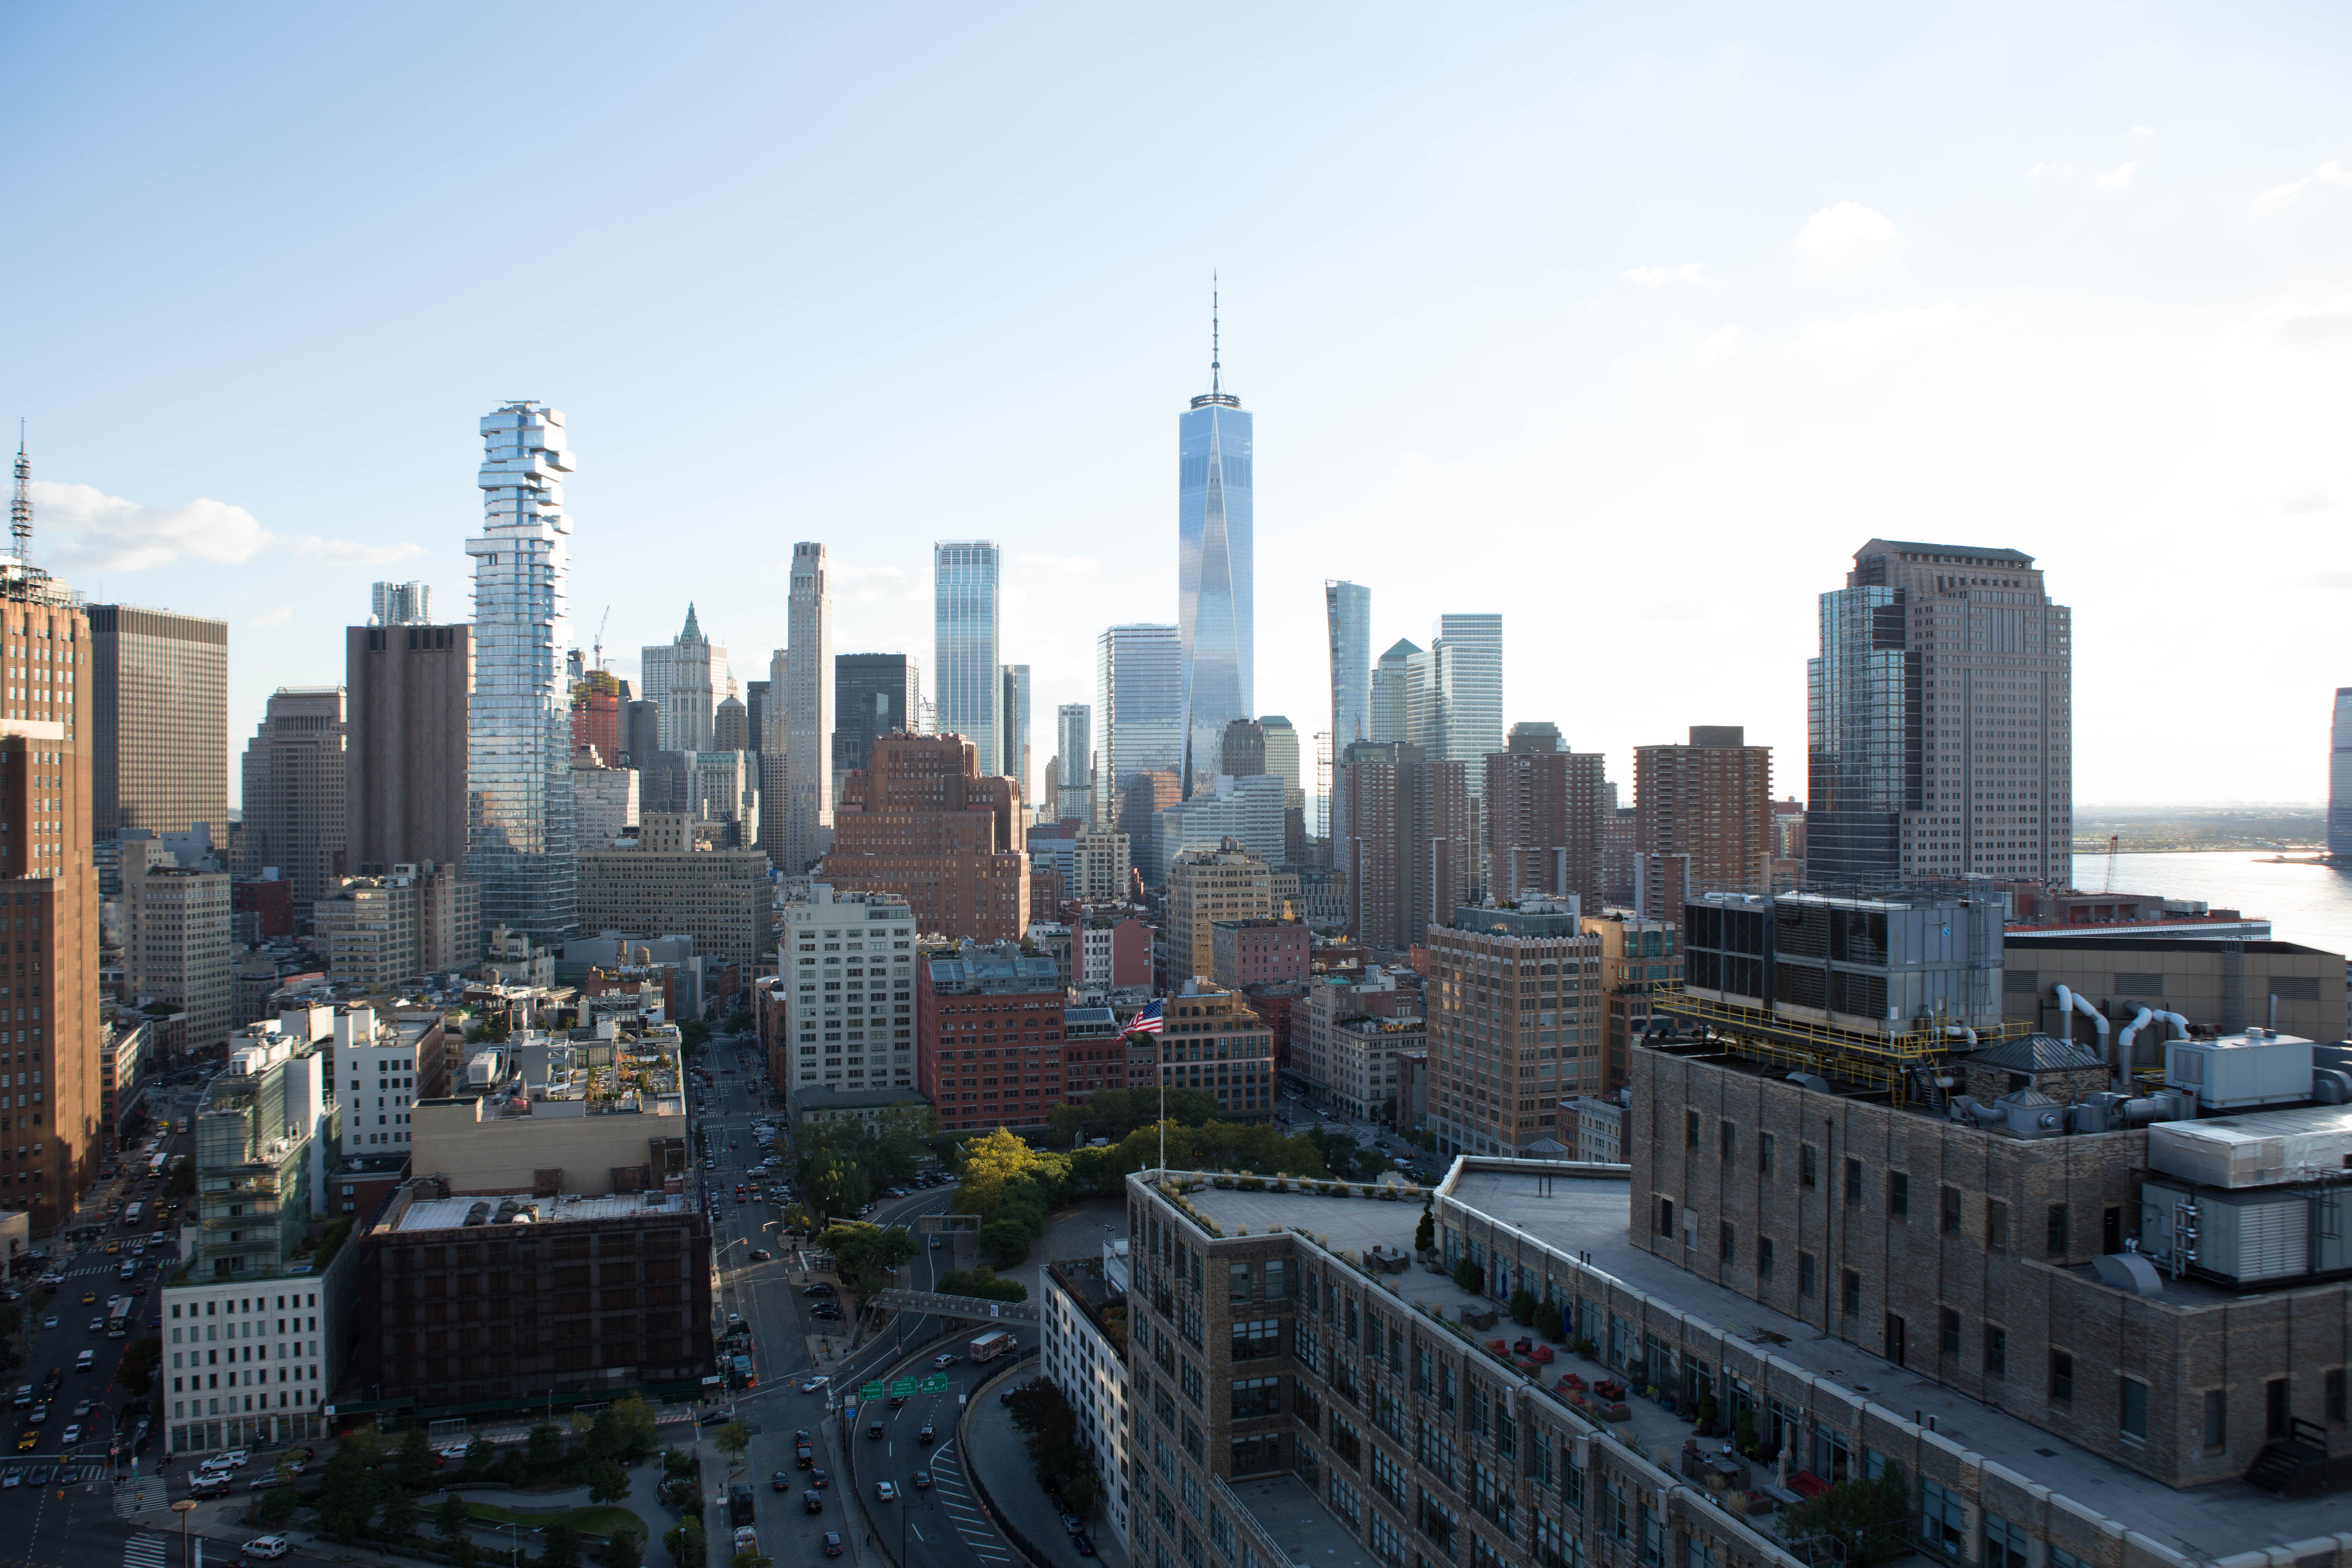 FiDi, as seen from 565 Broome Street, image by Andrew Campbell Nelson